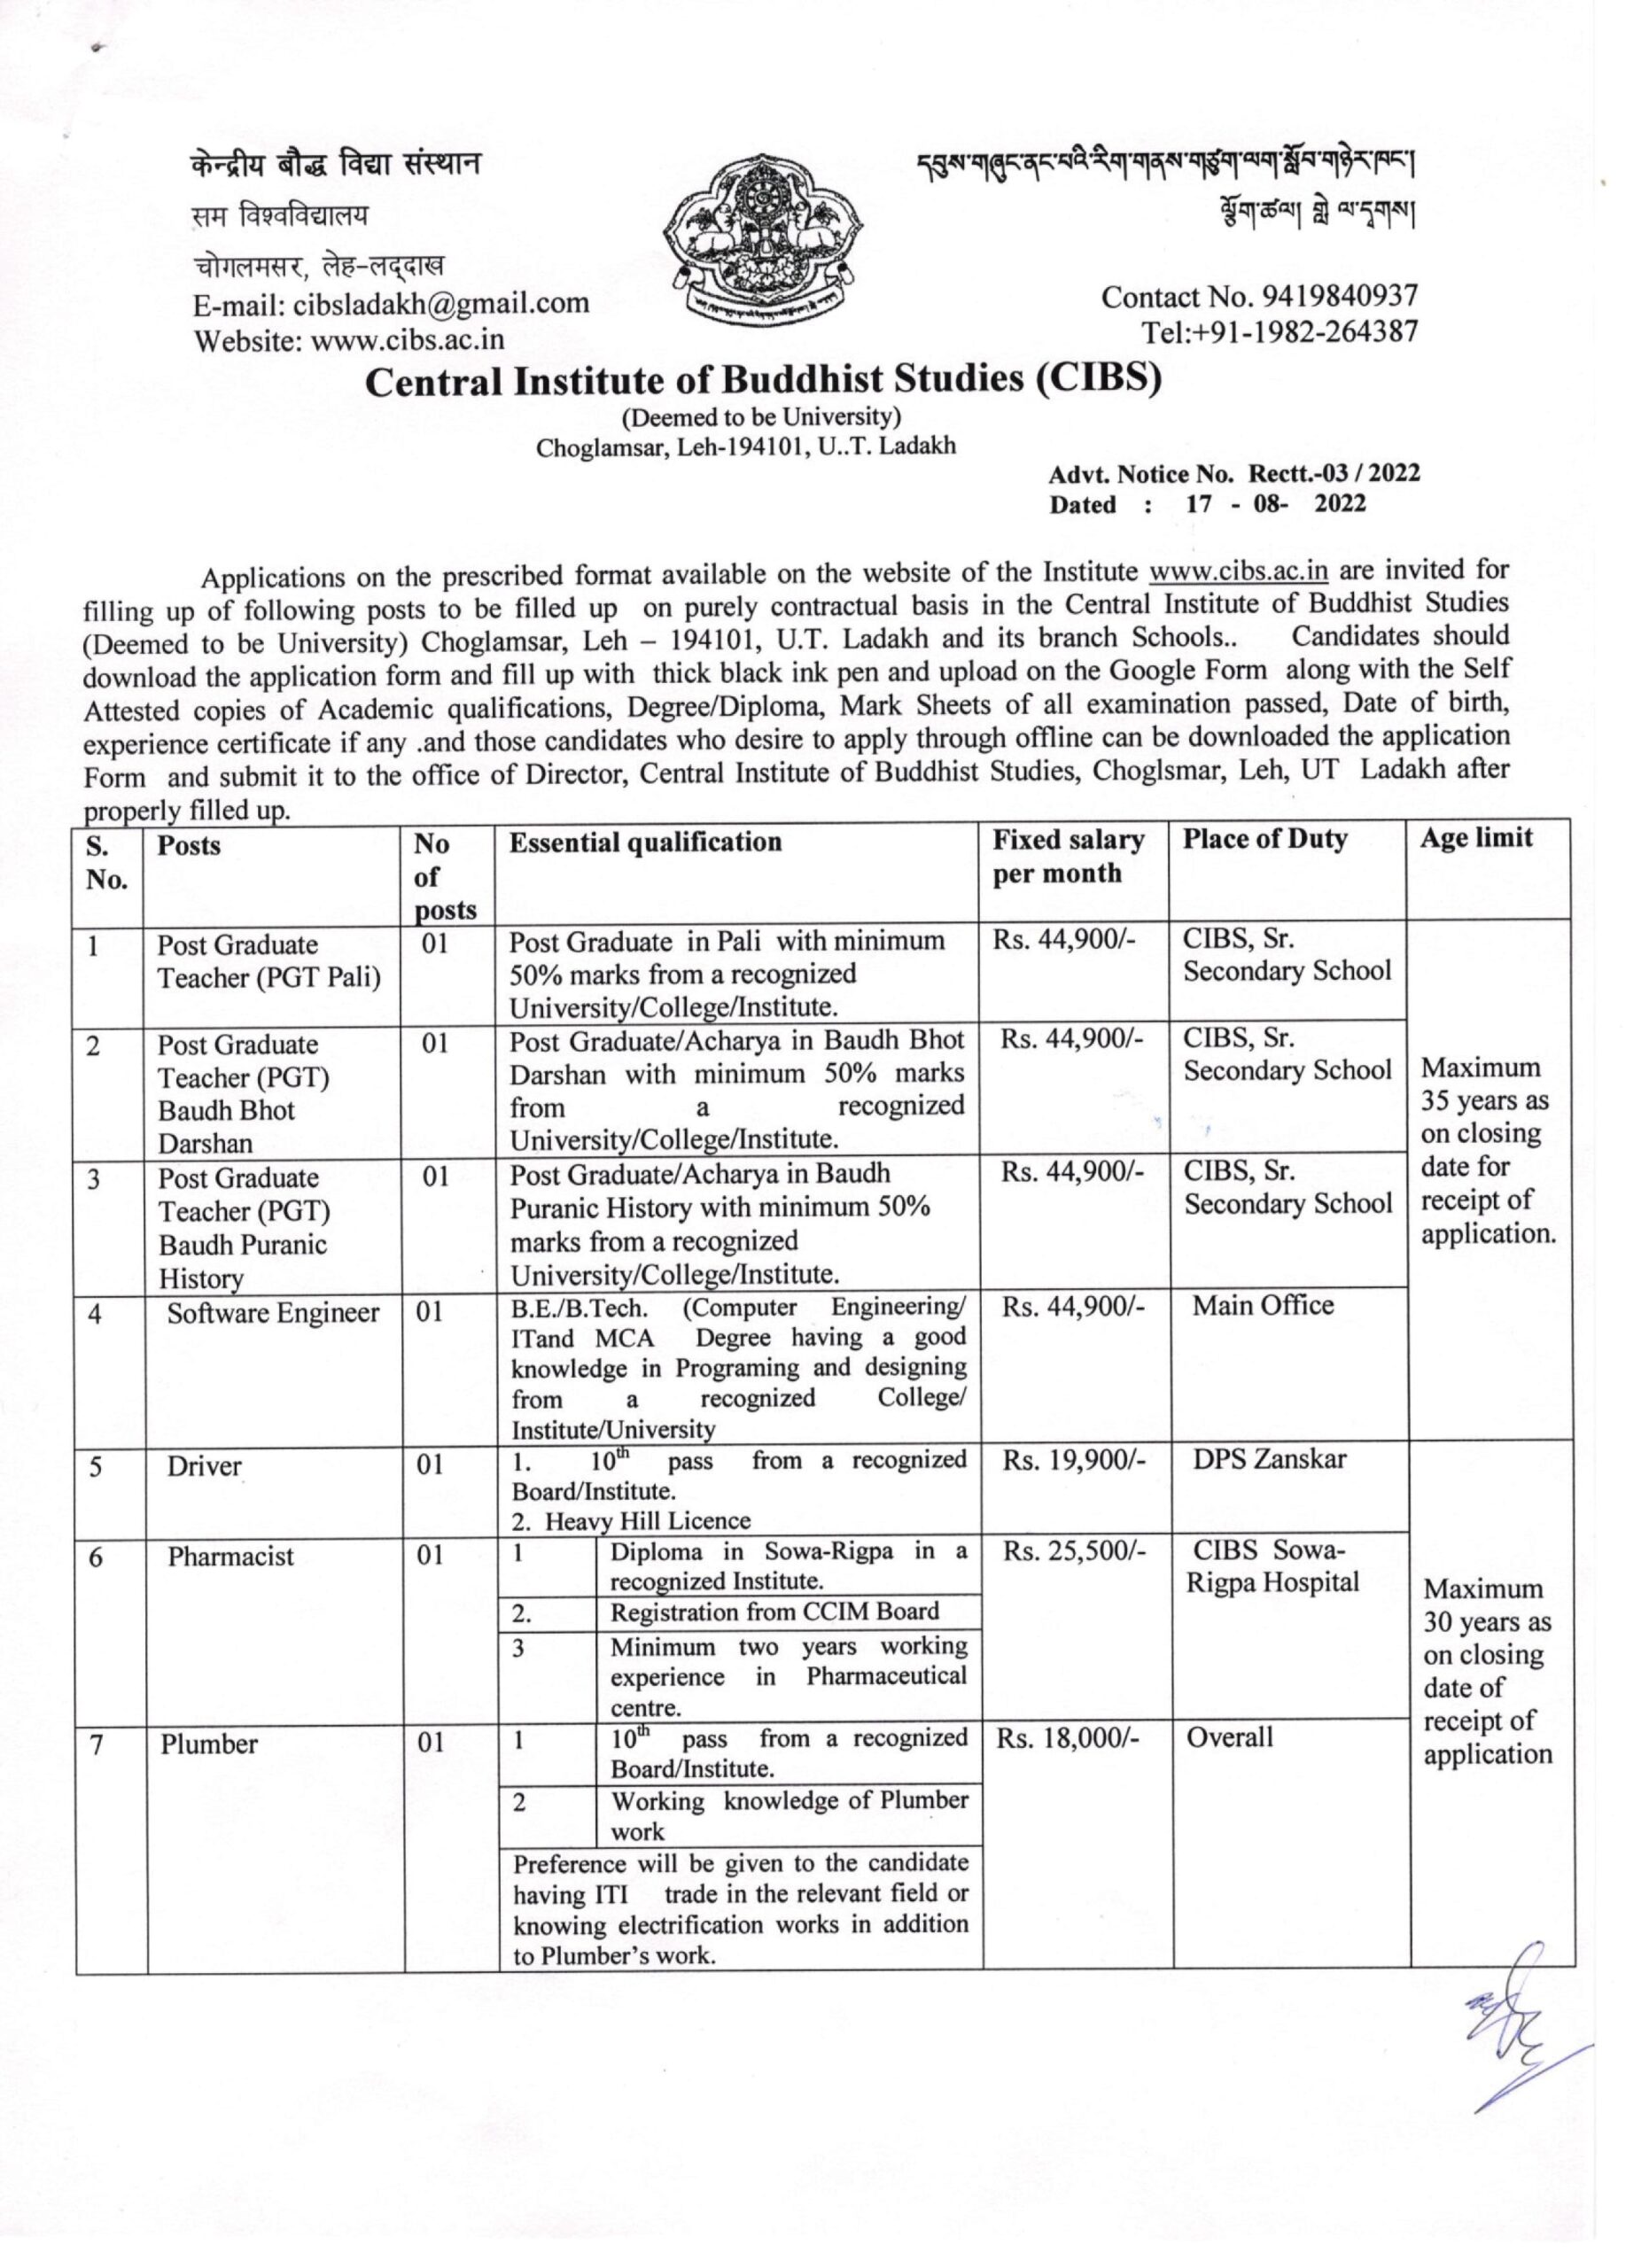 Extension of last date for online application for various contractual  positions in University of Ladakh.